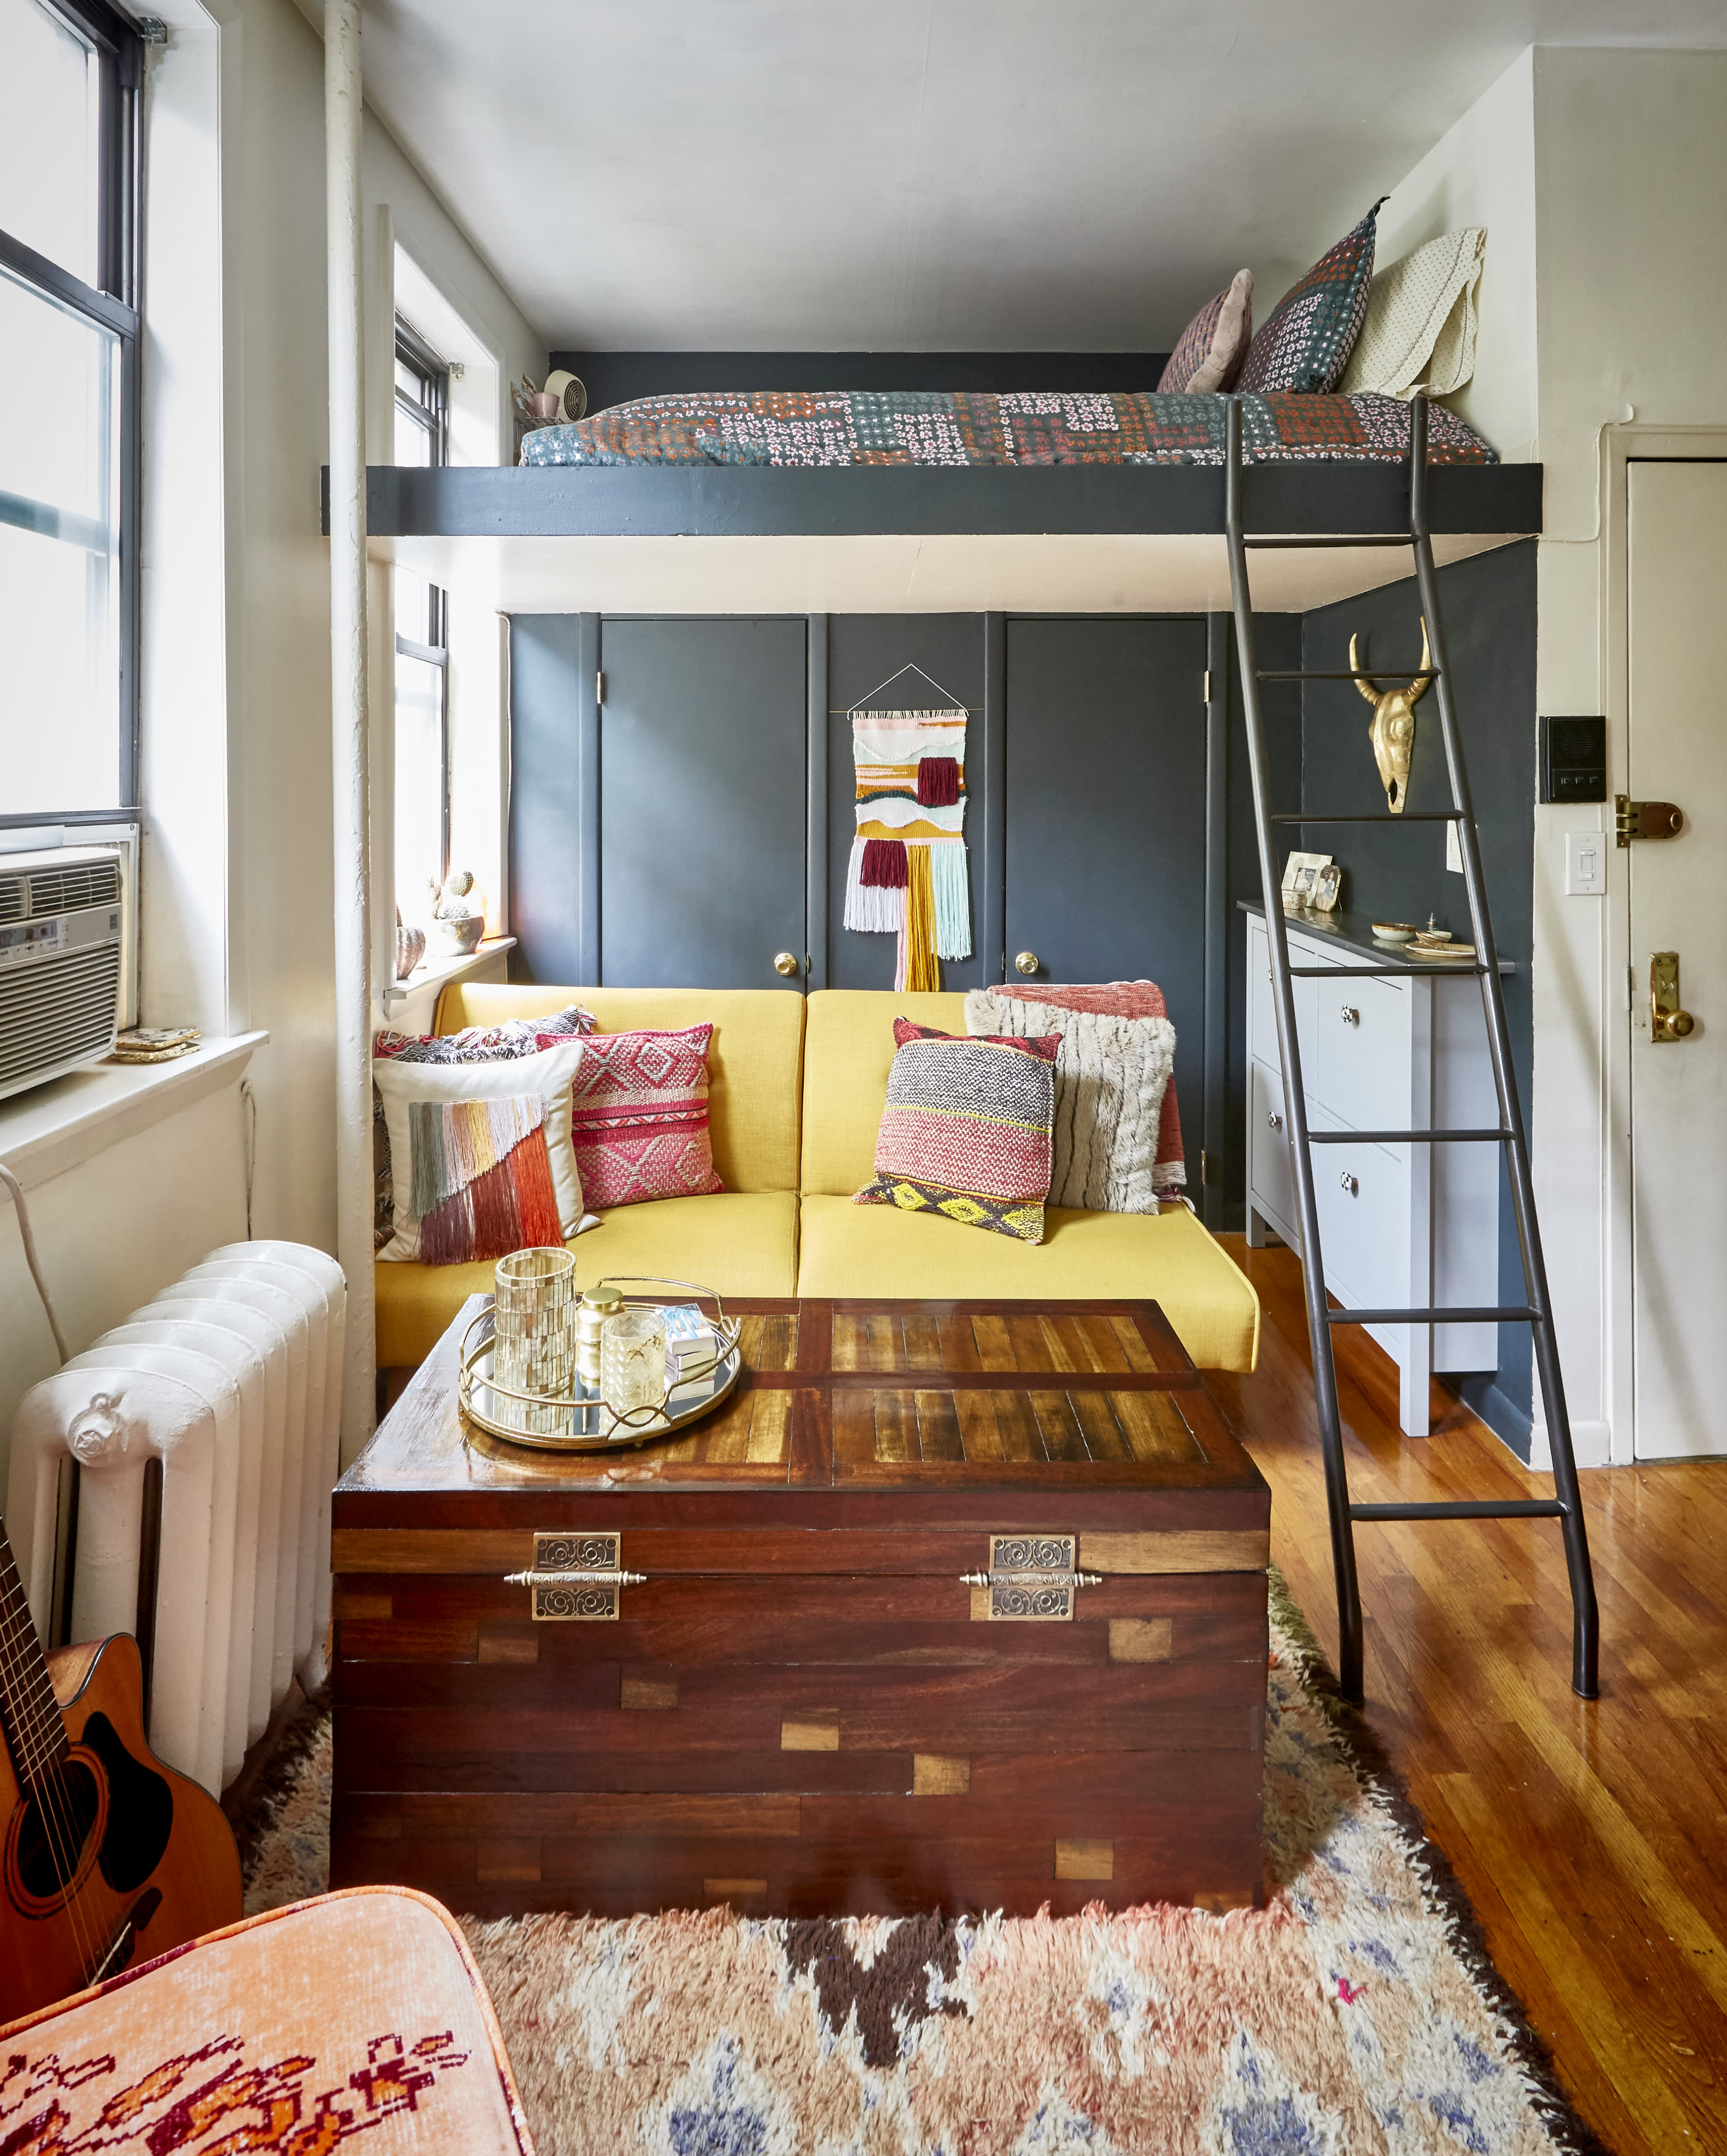 248-Square-Foot Studio Apartment Small/Cool Winner | Apartment Therapy